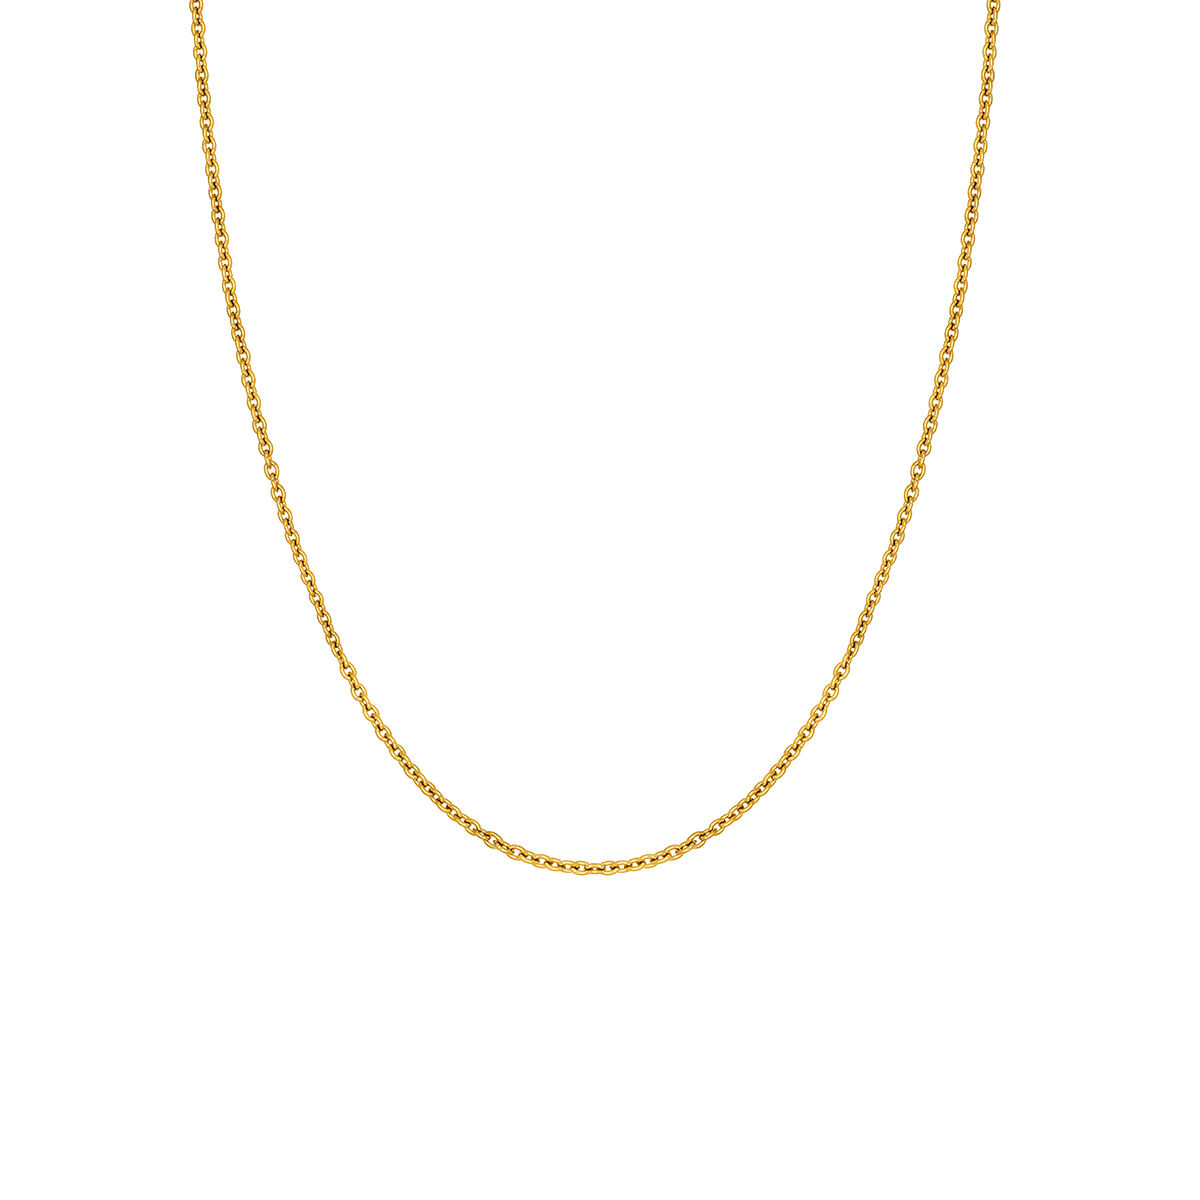 Long chain in 18 kt yellow gold-plated sterling silver, J03737-02, hi-res